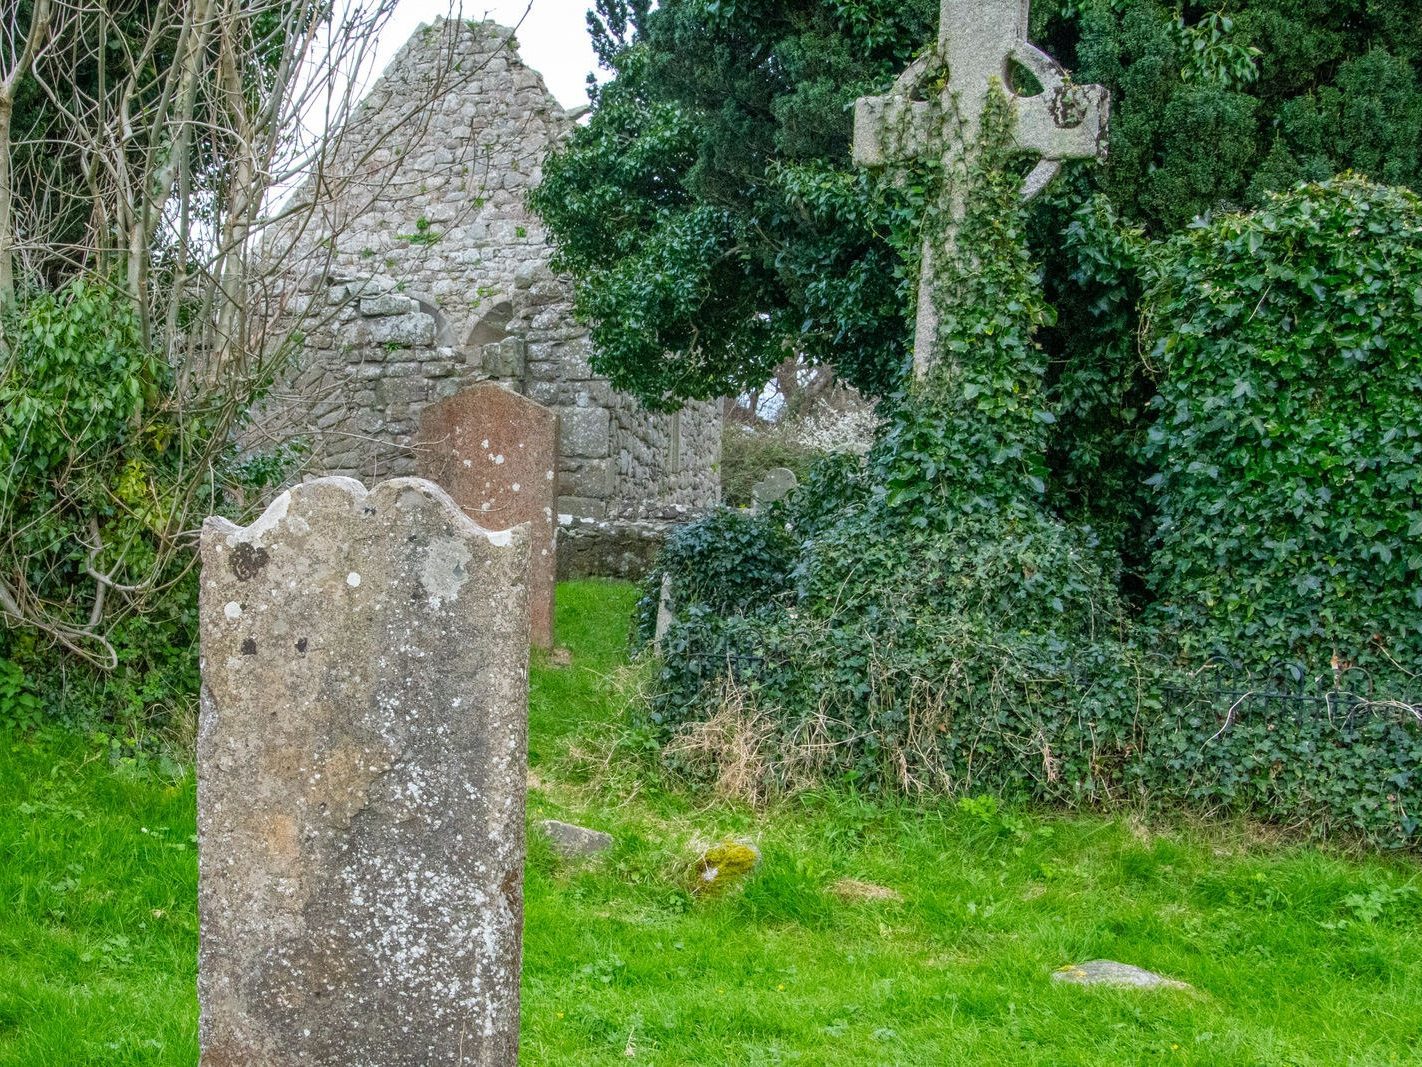 TWO CROSSES AND TULLY CHURCH AT LAUGHANSOWN LANE [THE CHURCH AND GRAVES]-223567-1